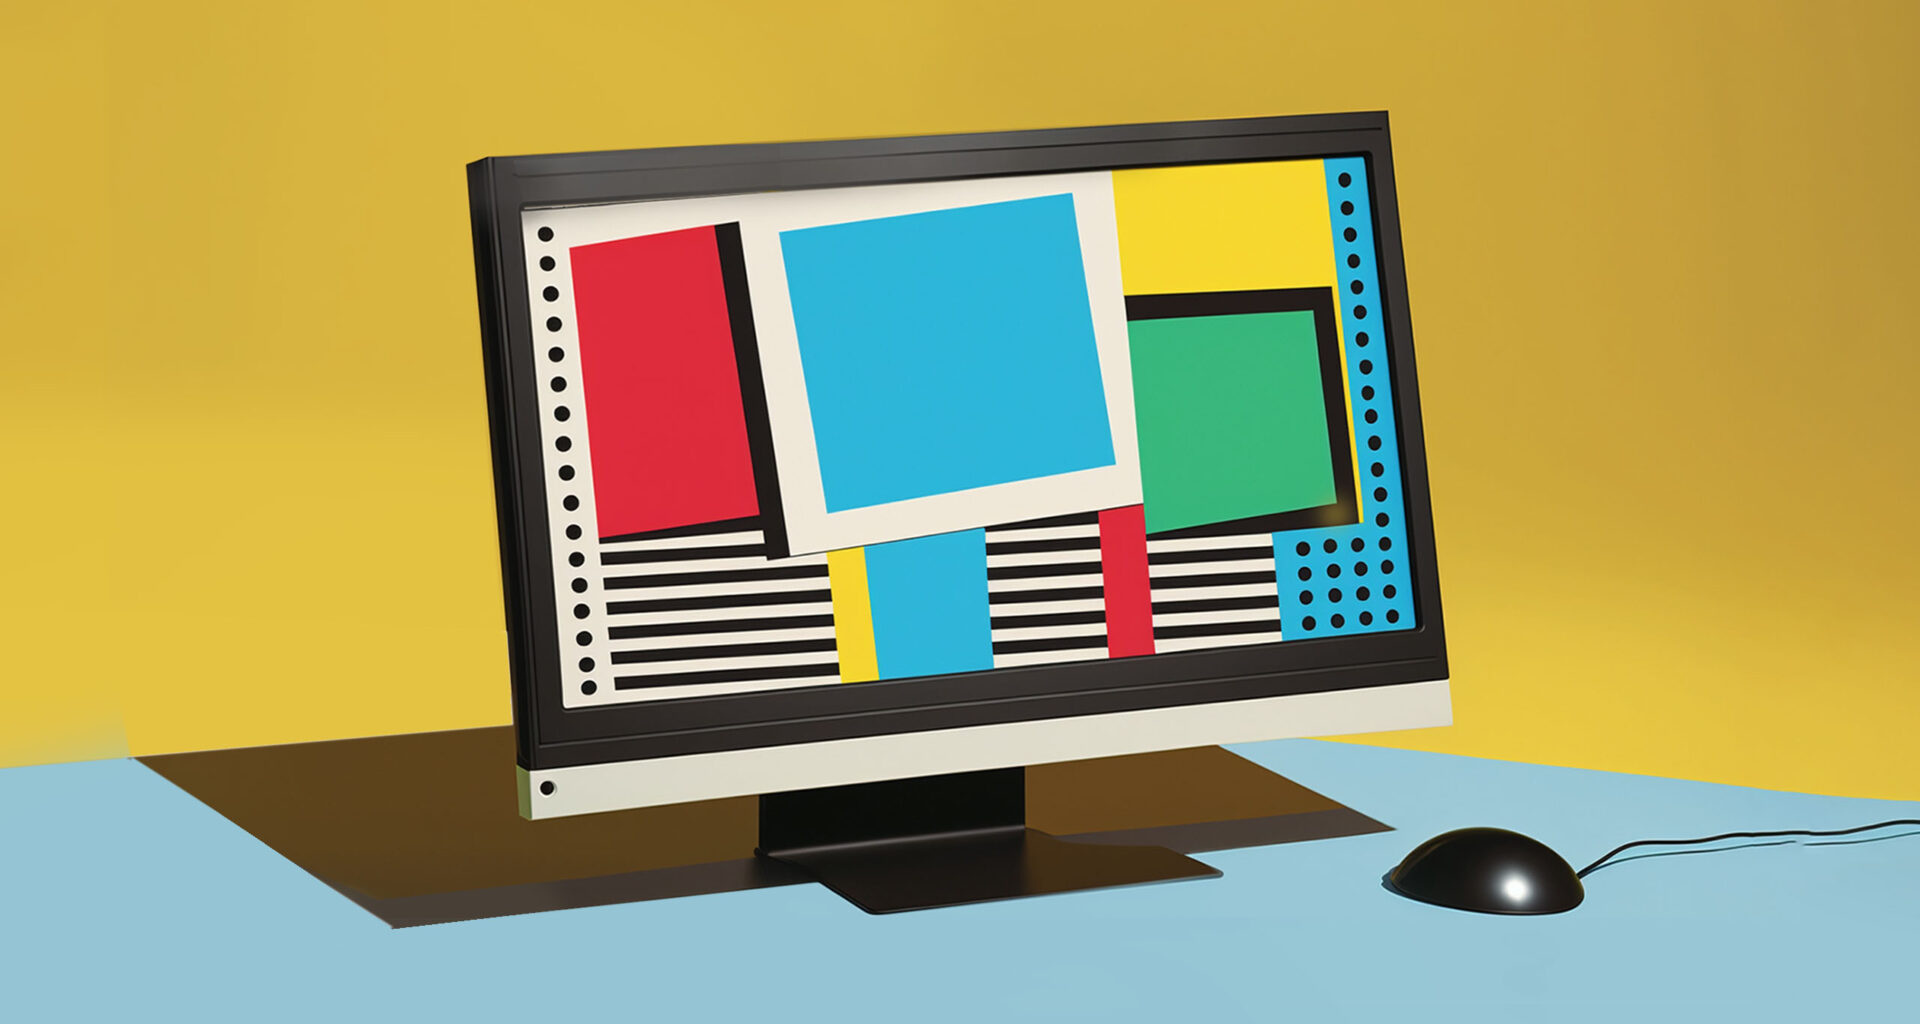 A pop art style image of a computer and a mouse. The computer screen displays abstract shapes that represent graphic design.